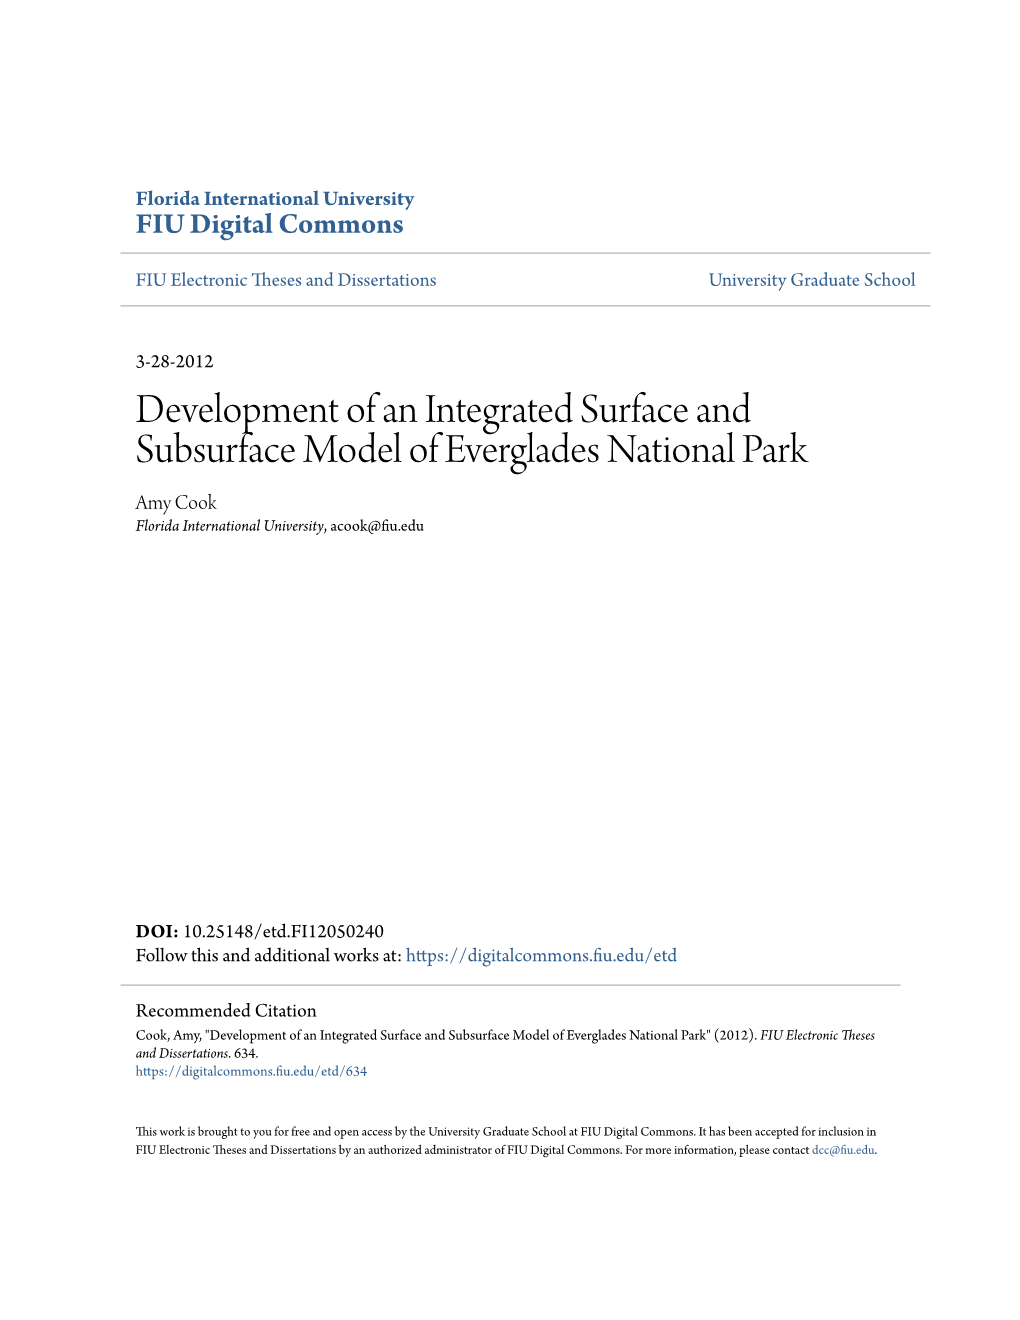 Development of an Integrated Surface and Subsurface Model of Everglades National Park Amy Cook Florida International University, Acook@Fiu.Edu